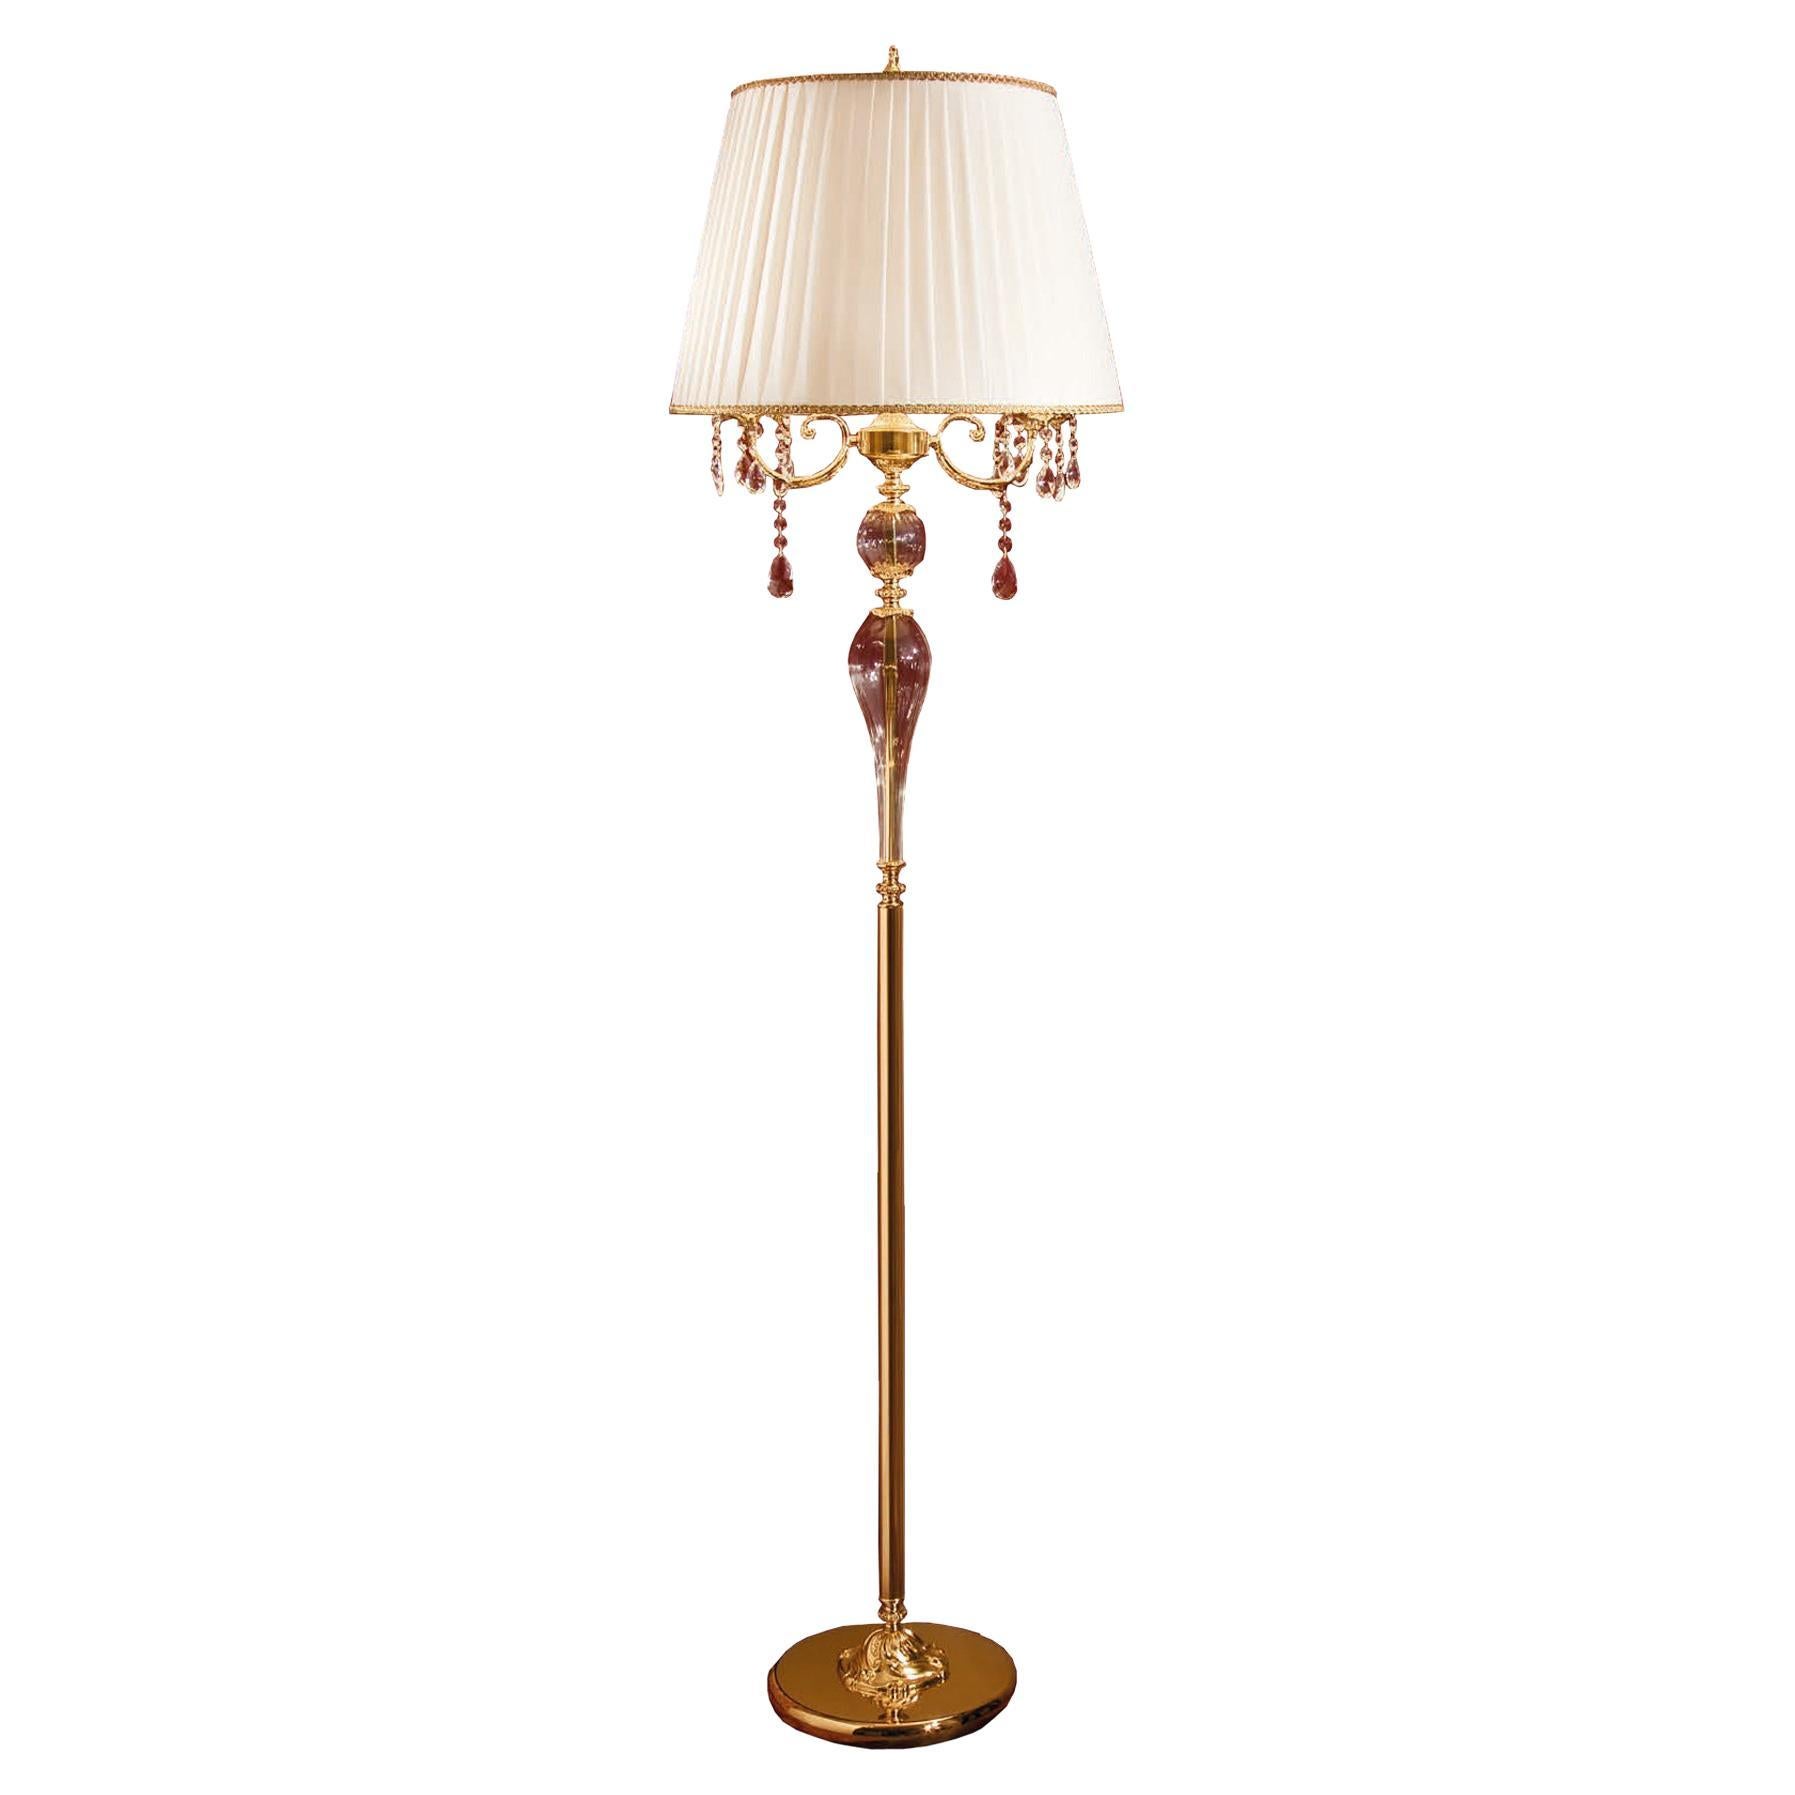 Dive into charme with this Modenese Luxury Interiors floor lamp. The straight line of the central pole, decorated with a 24kt antique gold plated finish, carefully holds 2 lights protected by a wide ivory lampshade, which is decorated at the bottom